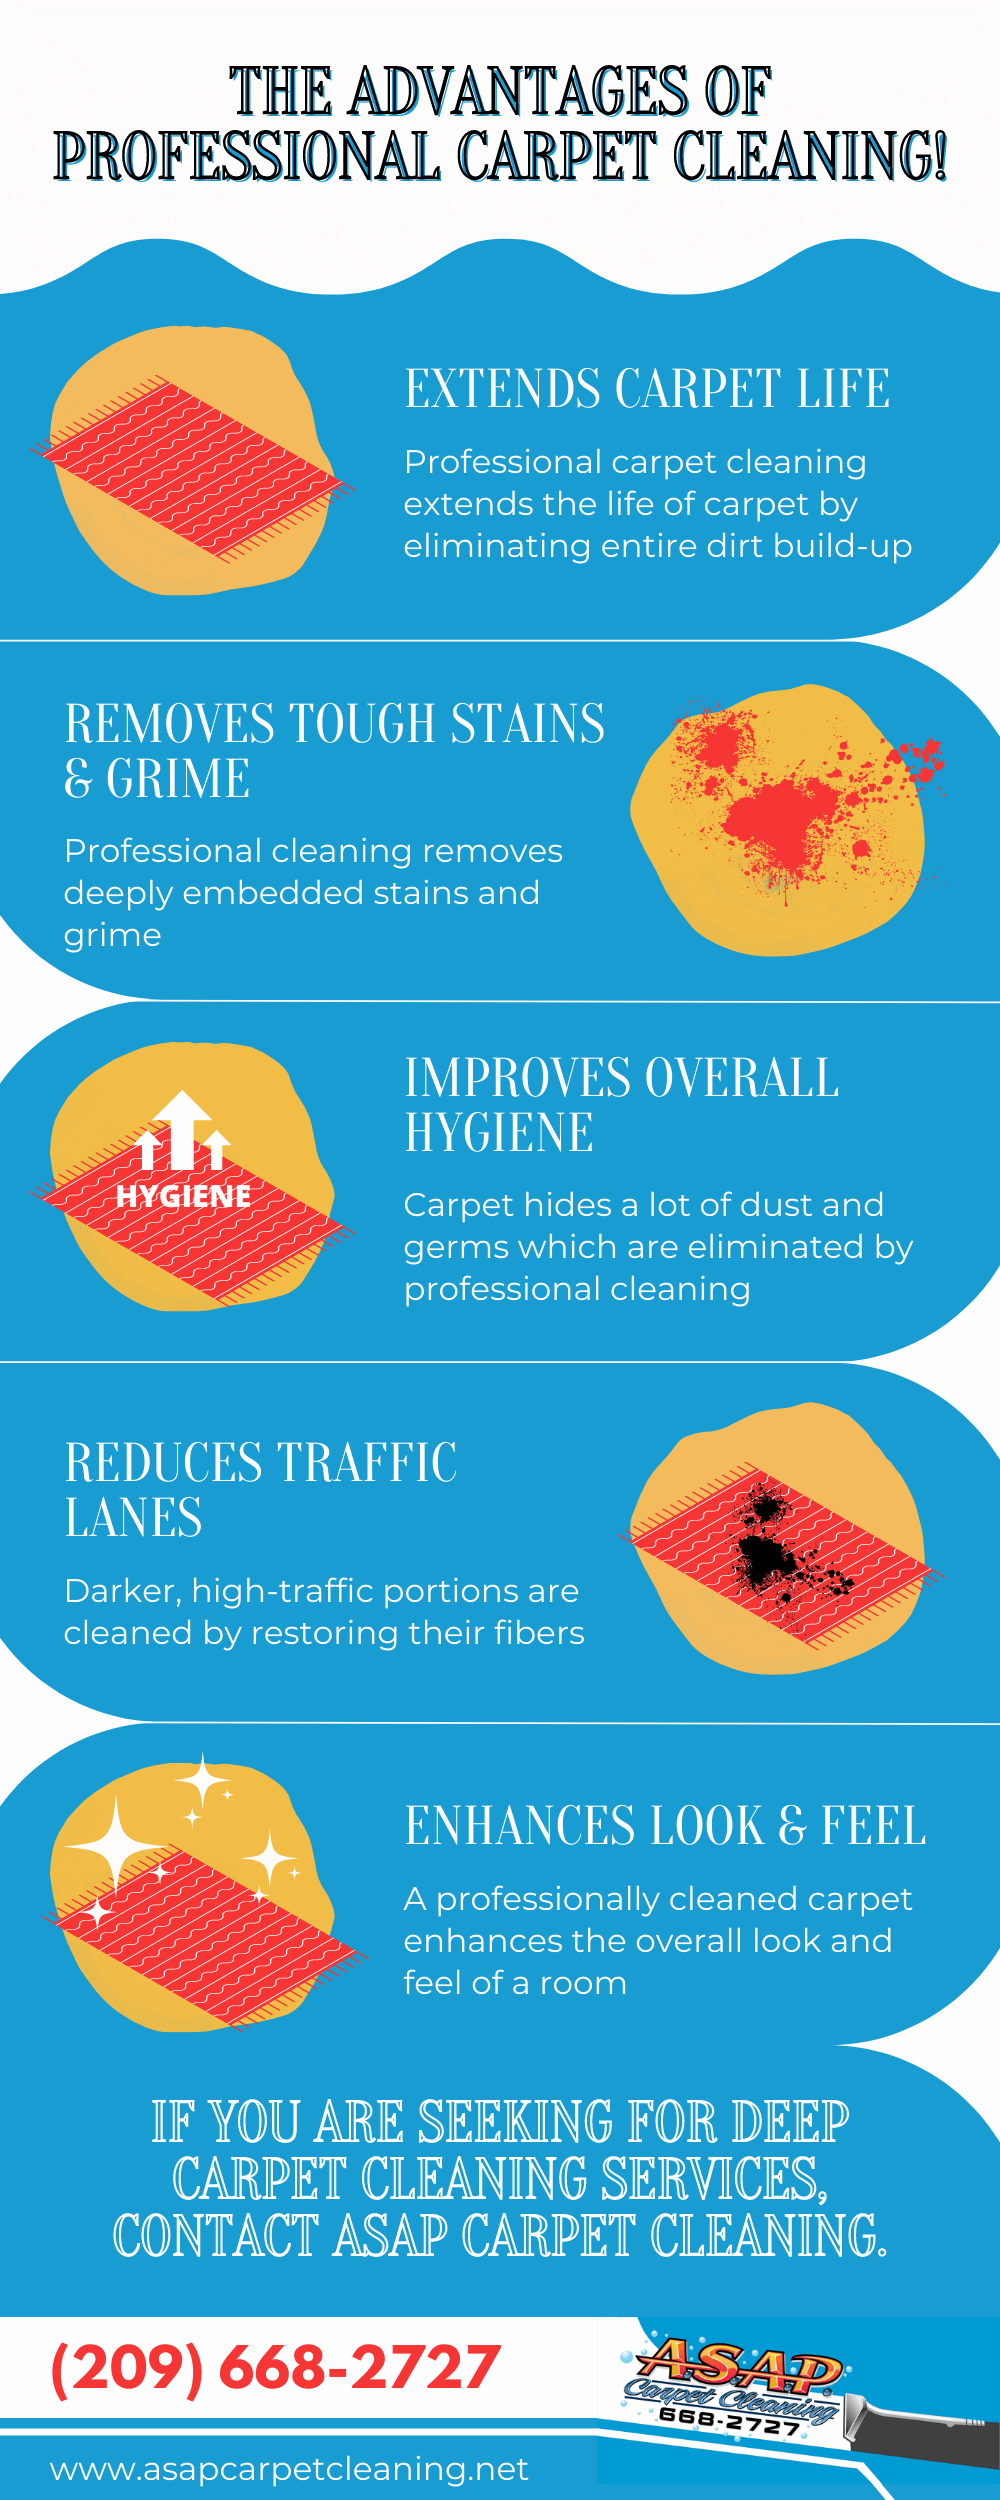 The Advantages Of Professional Carpet Cleaning! [Infographic]